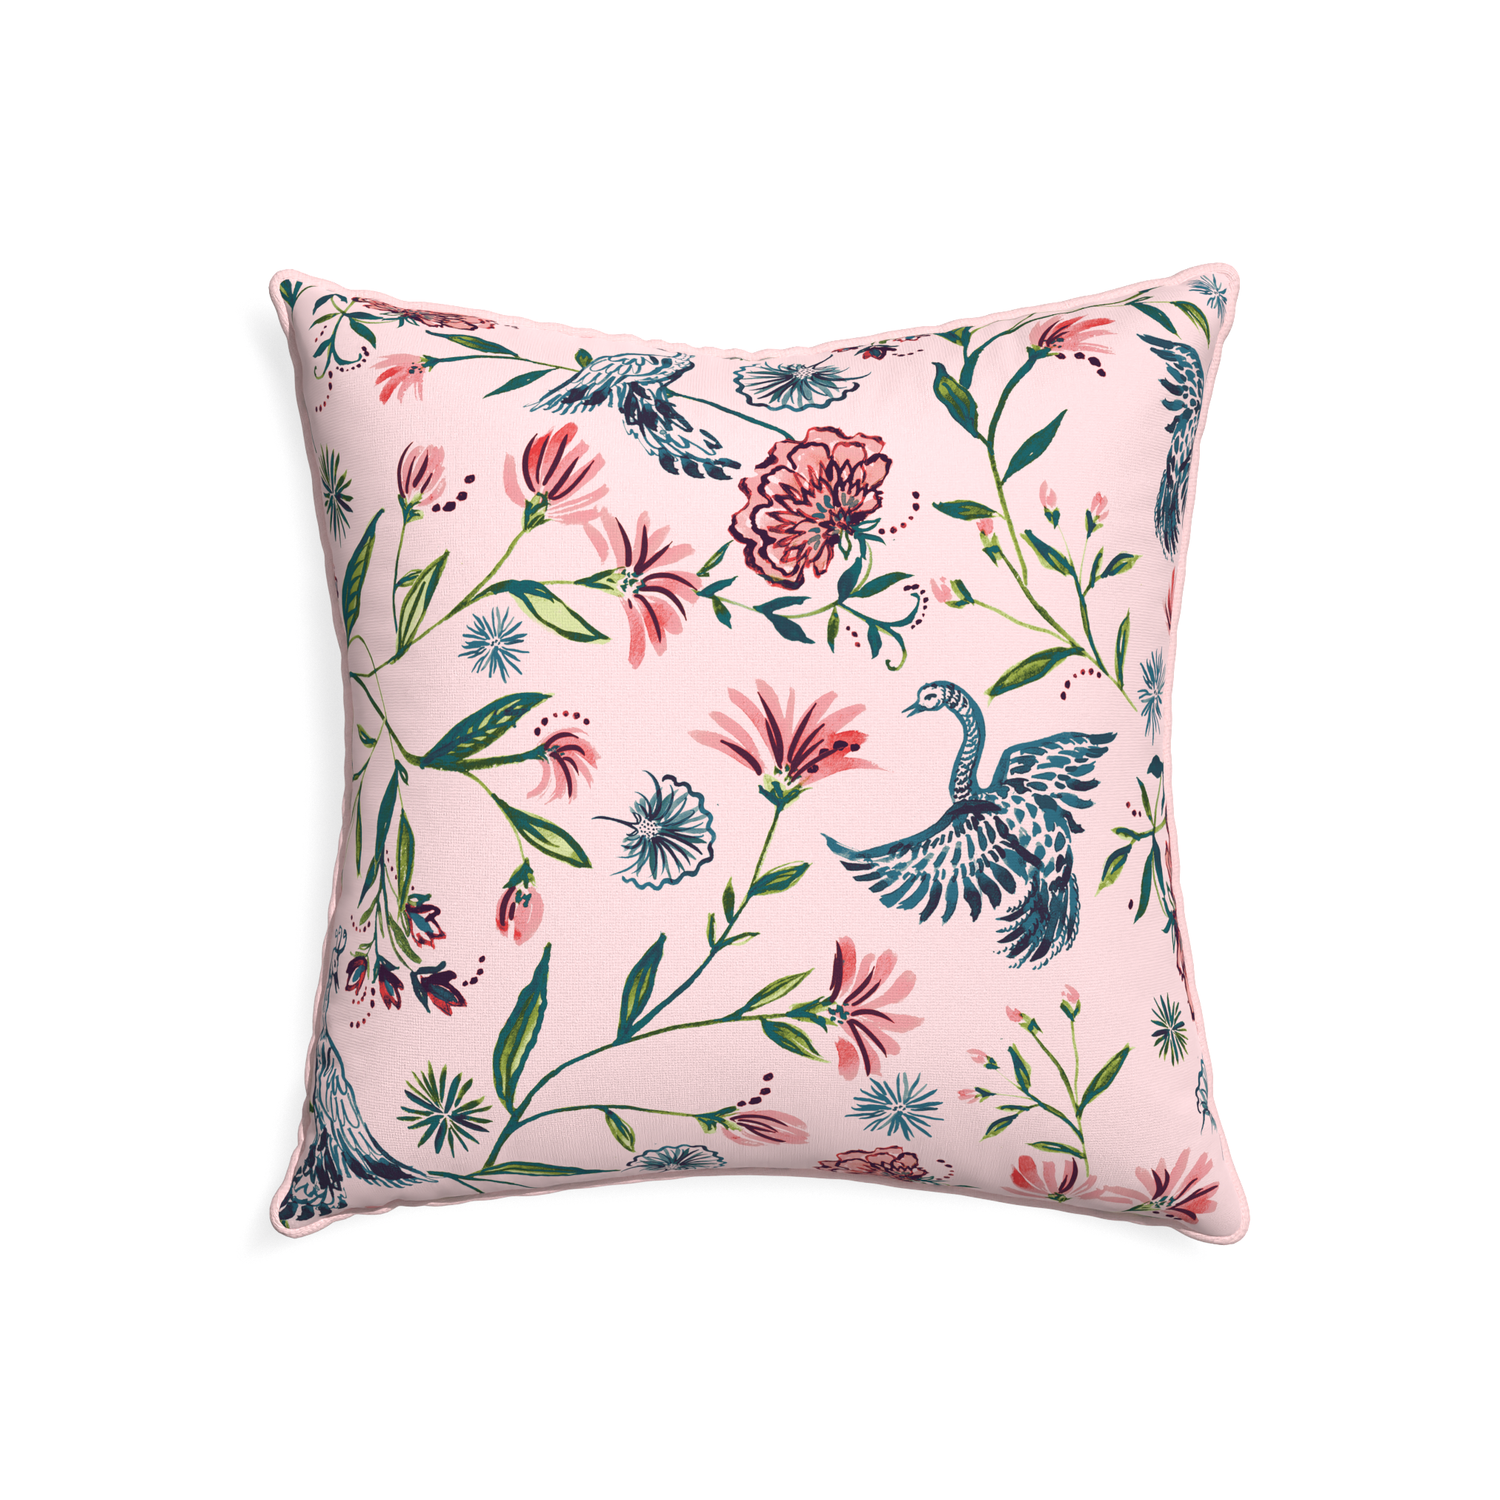 22-square daphne rose custom pillow with petal piping on white background